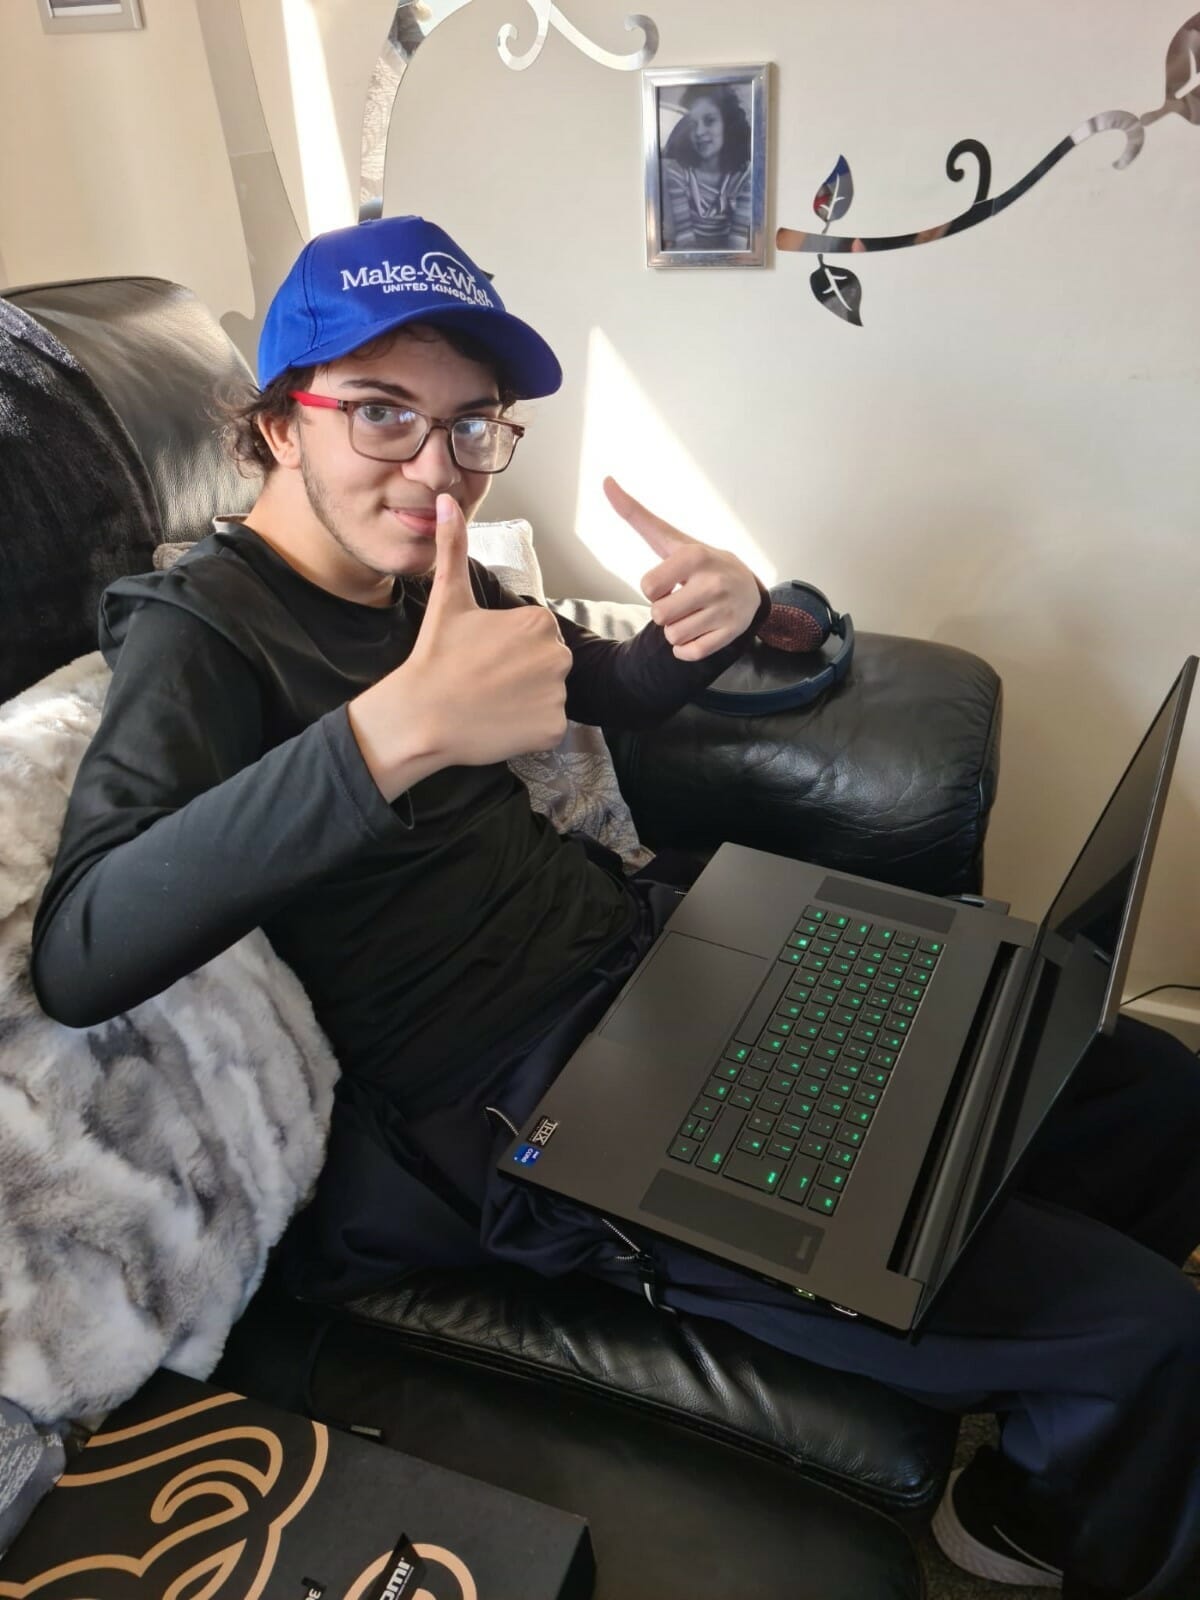 Isaac's gaming PC (which is a laptop) and Isaac with the thumbsup